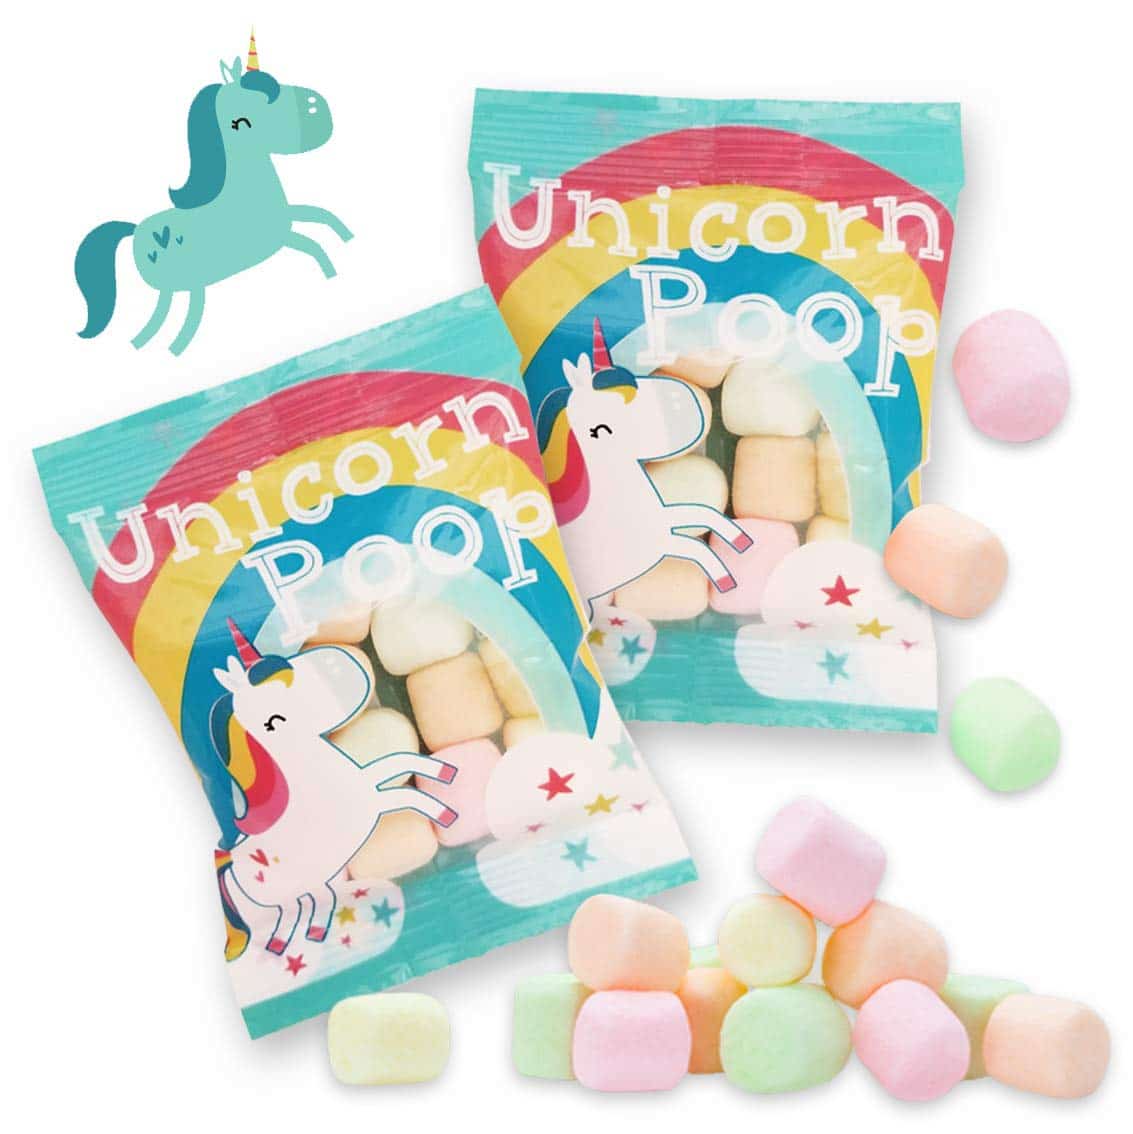 unicorn-party-ideas-poop-candy